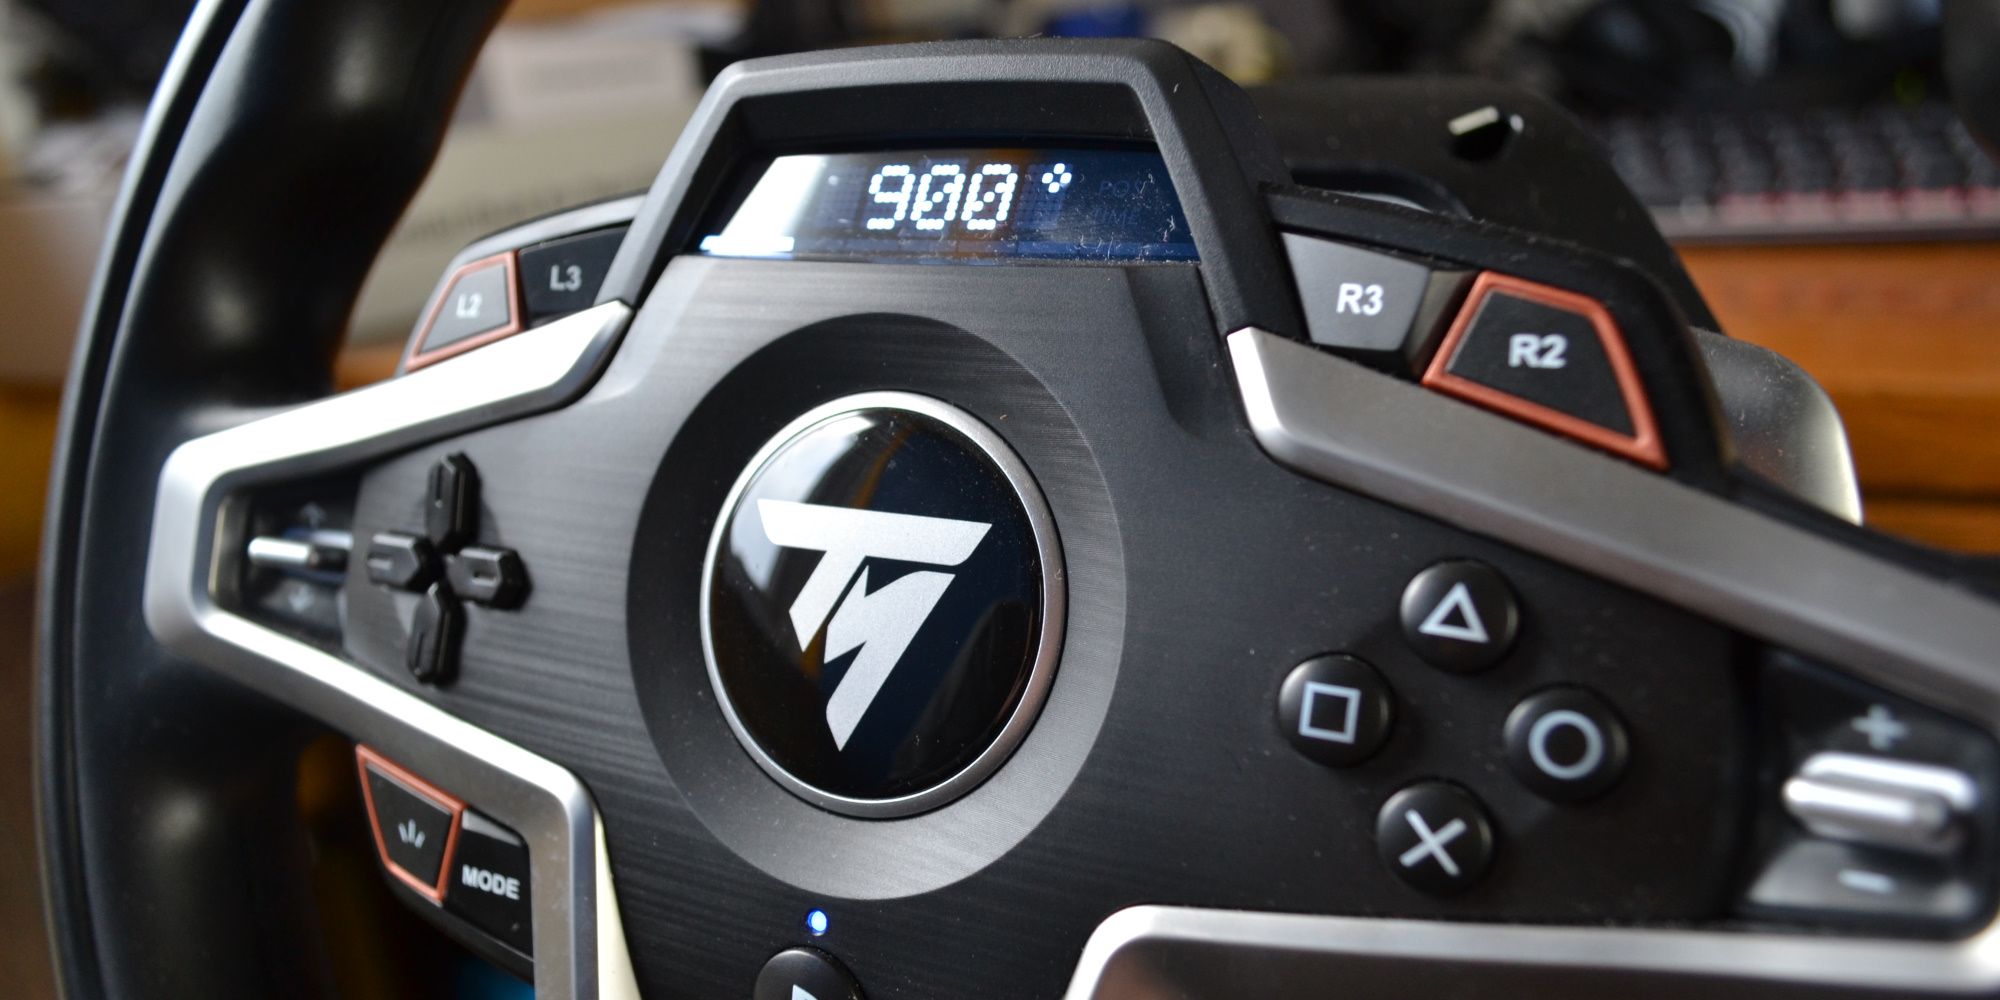 Thrustmaster T248 Review: New Hybrid Drive System Will Smash Your Lap Times